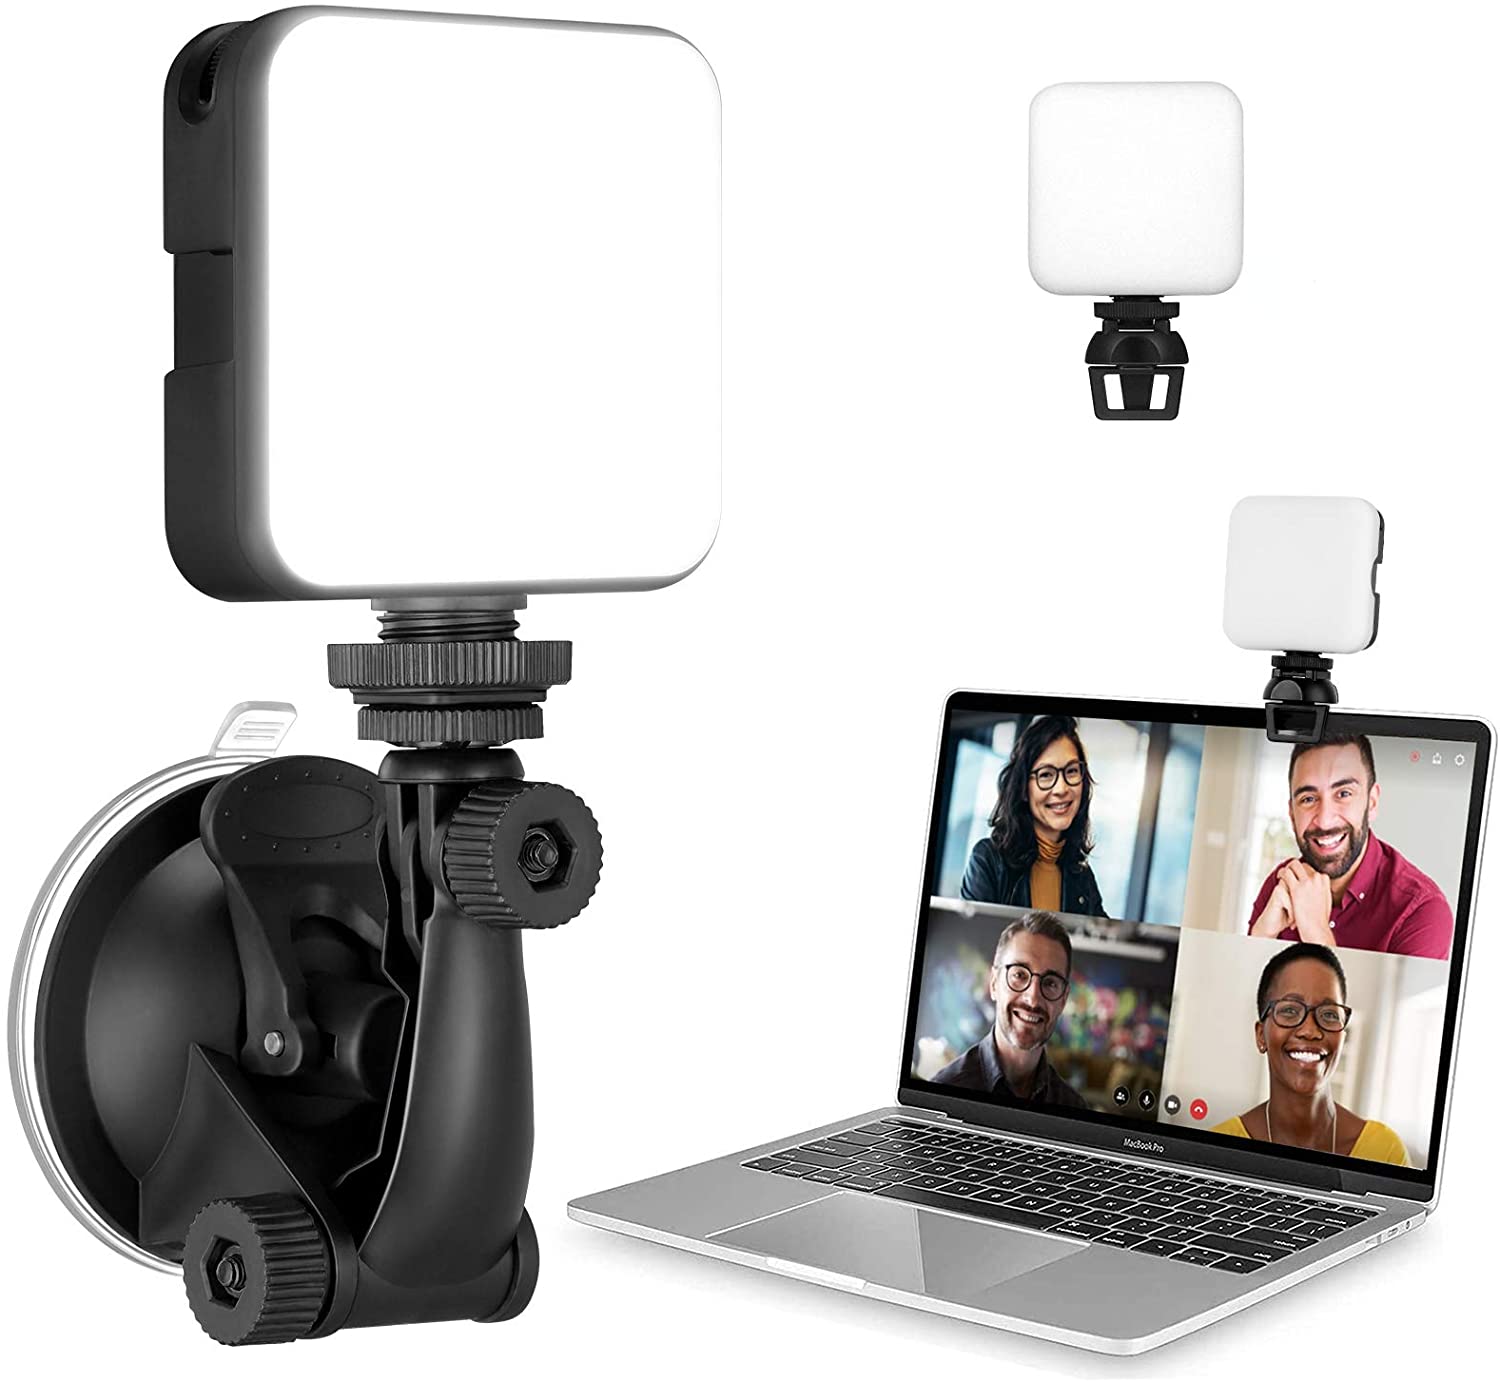 MUIFA Video Conference Lighting Kit - e4cents